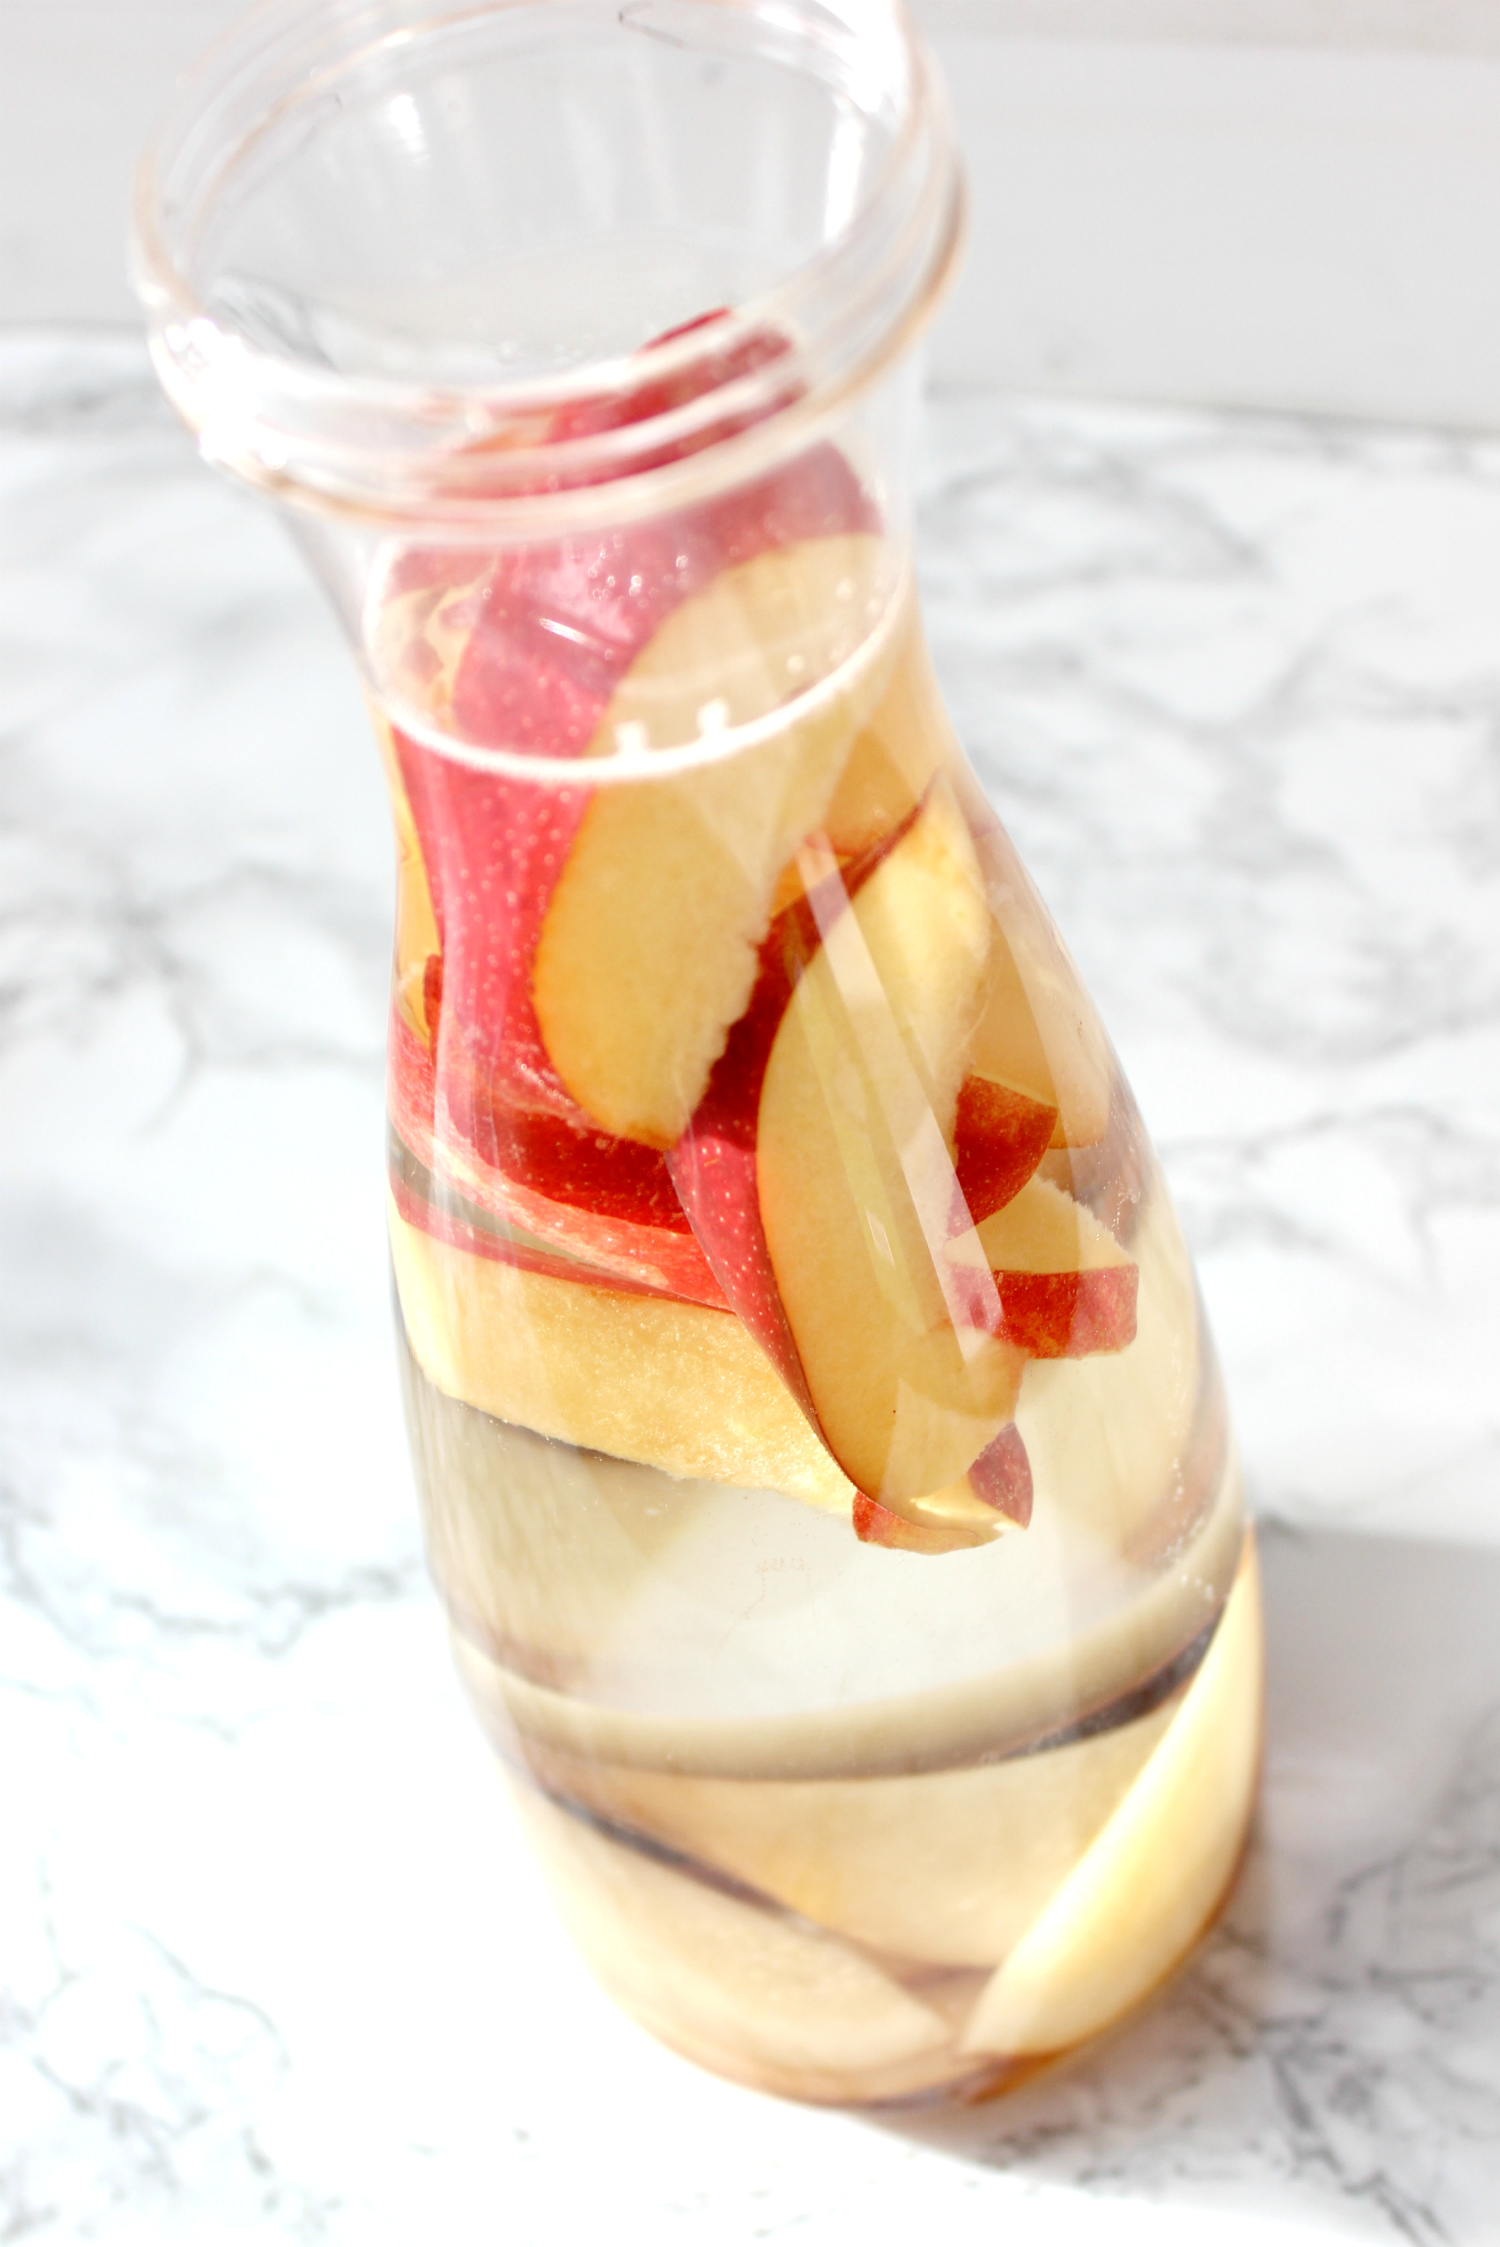 This cinnamon apple pear fall detox water is a must-try this holiday season for warding off stomach aches and holiday sugar highs!